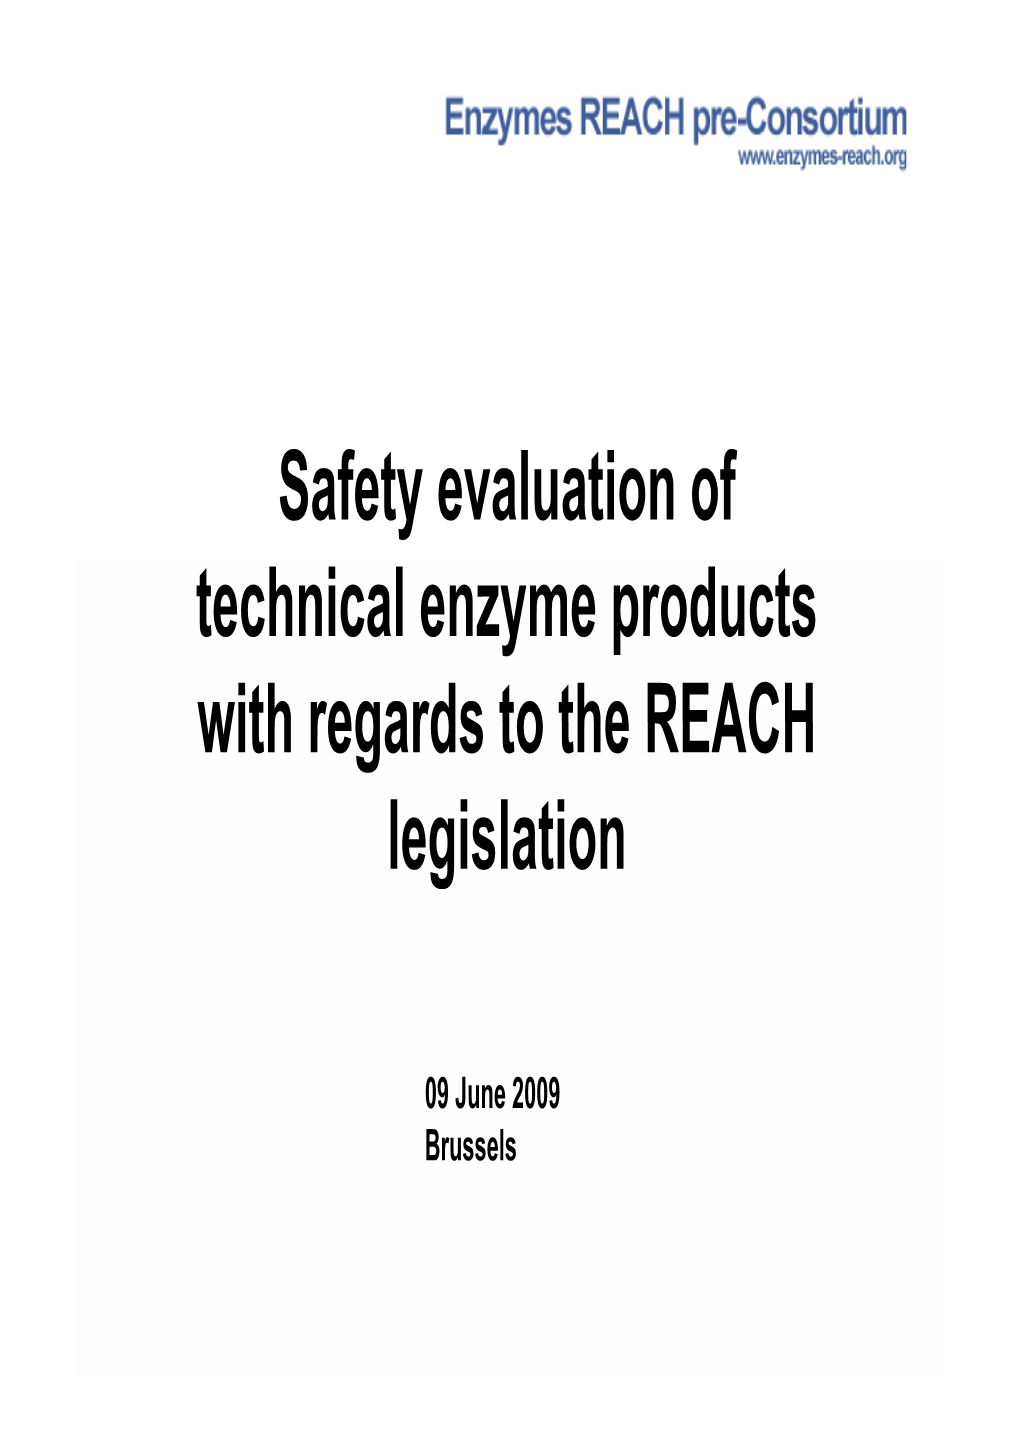 Safety Evaluation of Technical Enzyme Products with Regards to the REACH Legislation